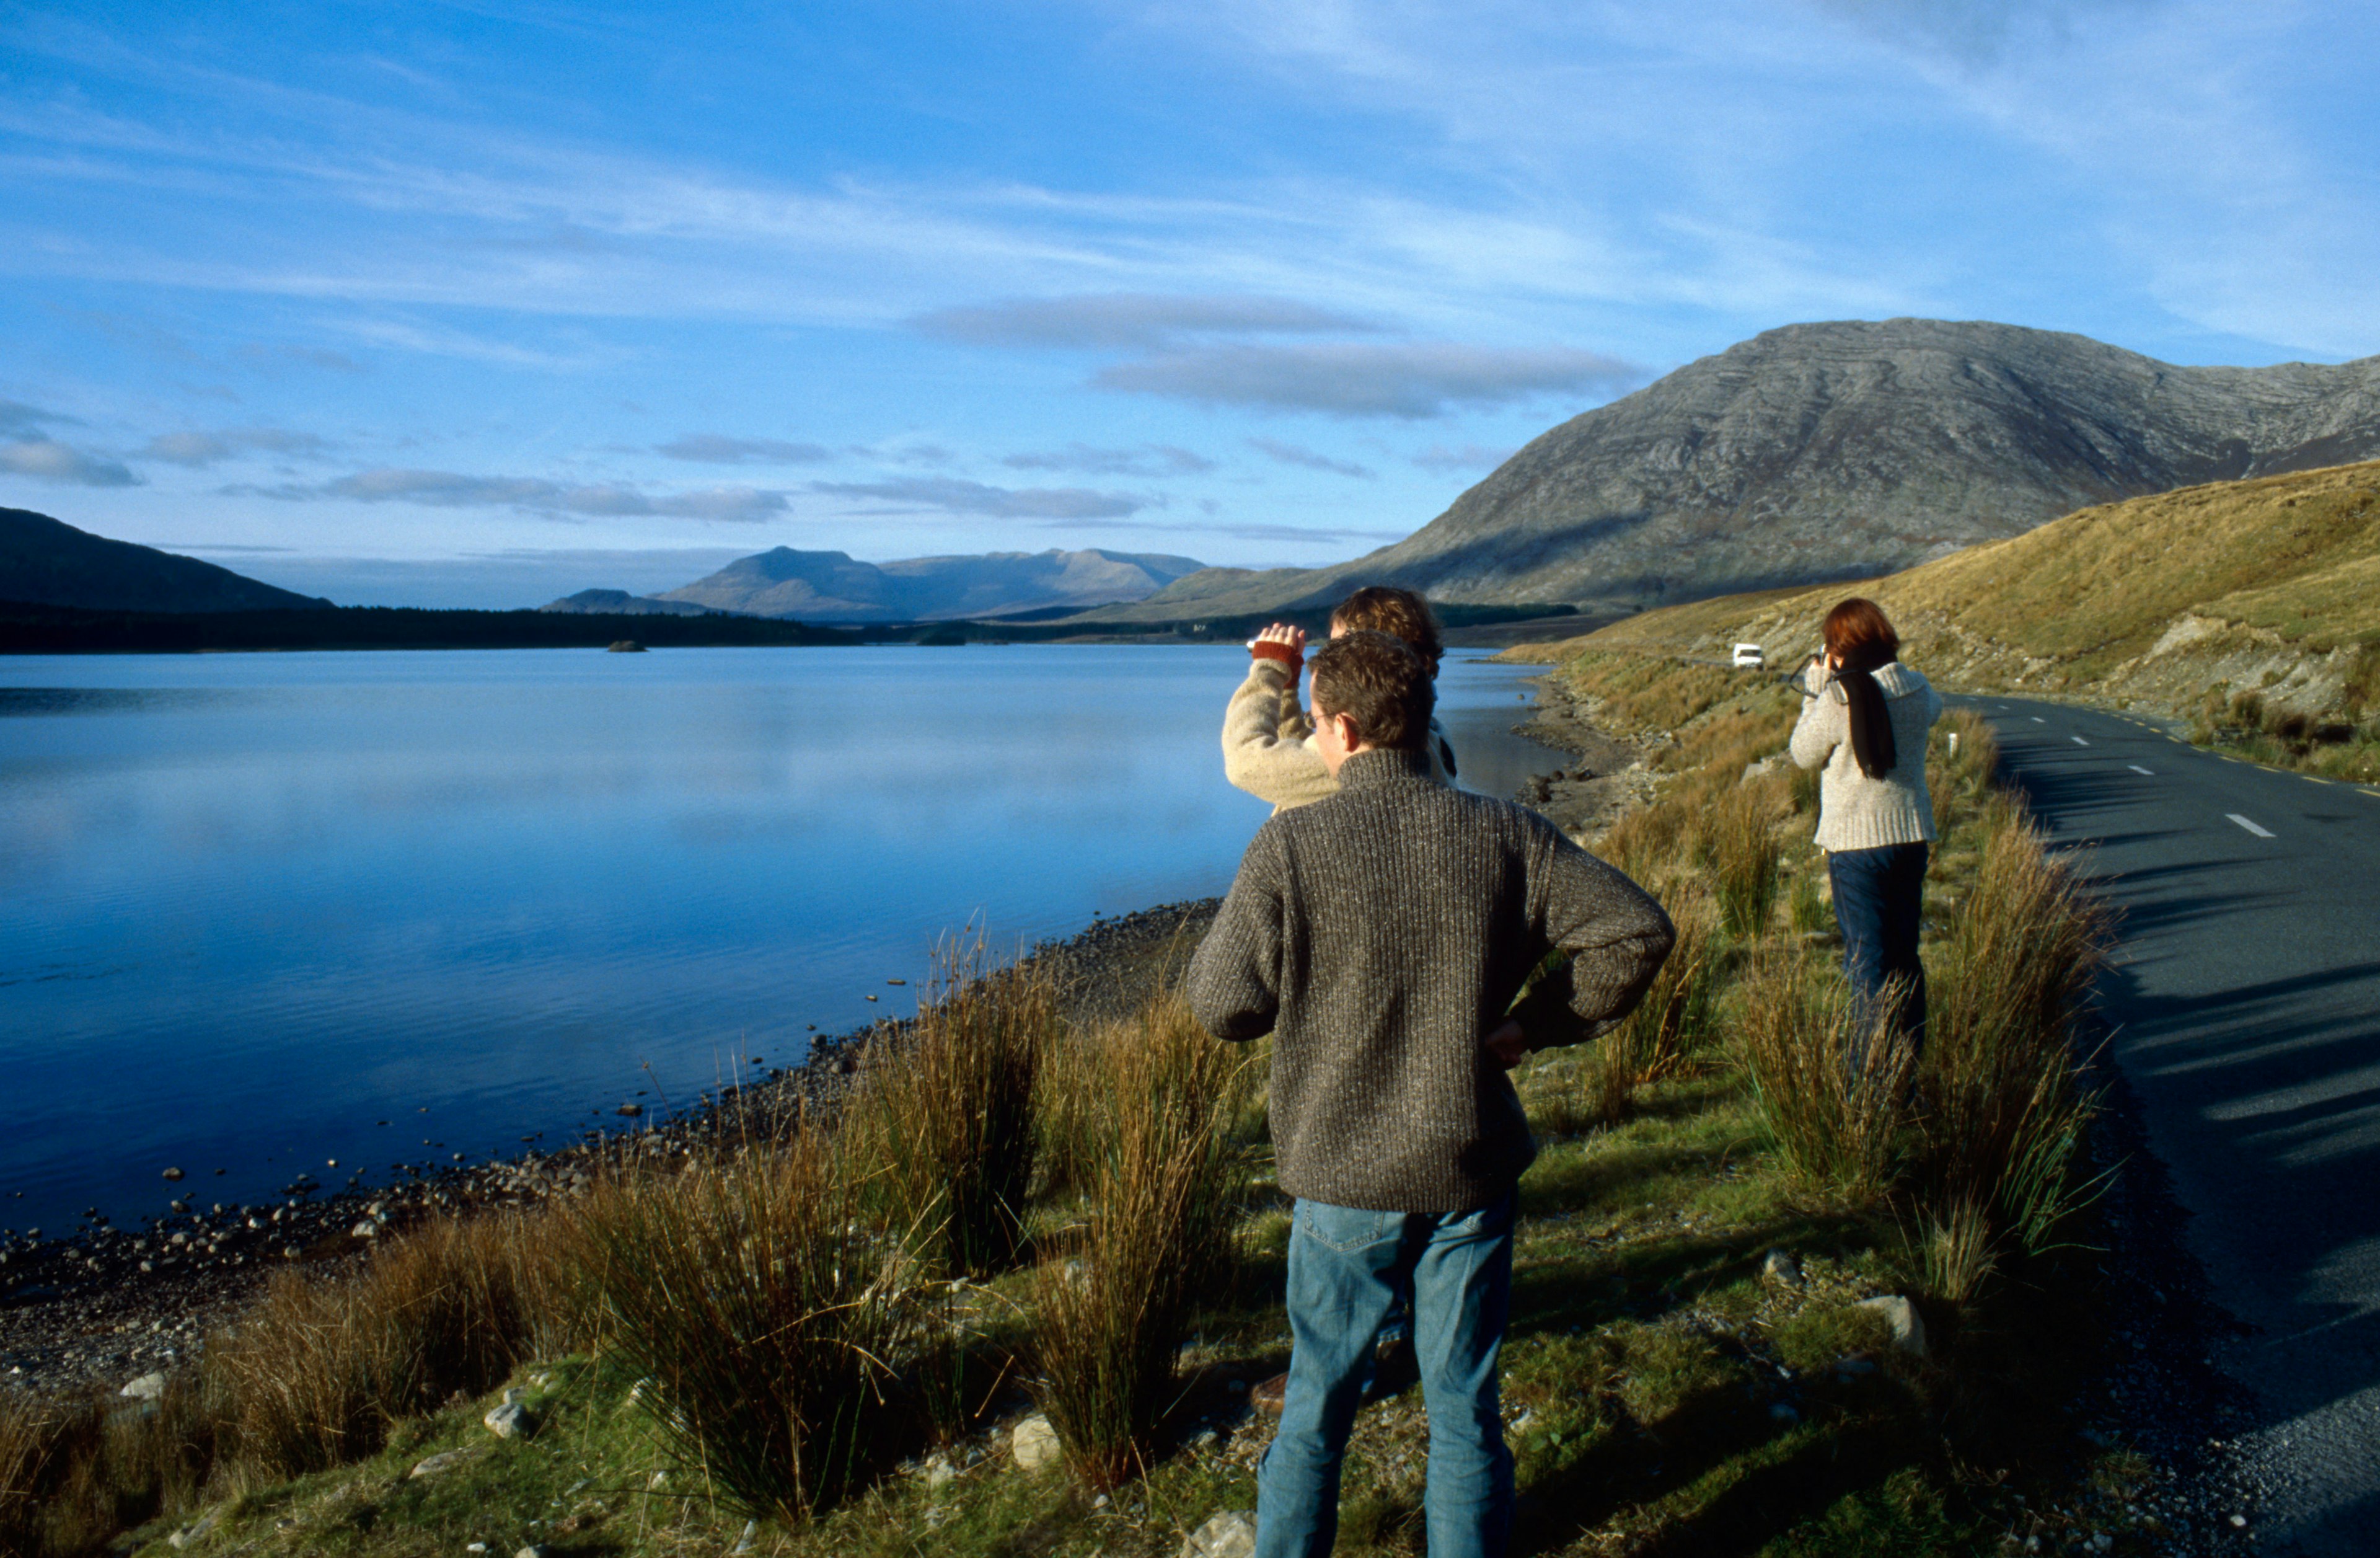 Small group of people is standing on the road side to gaze at the astonishing scenery of Connemara in Ireland.